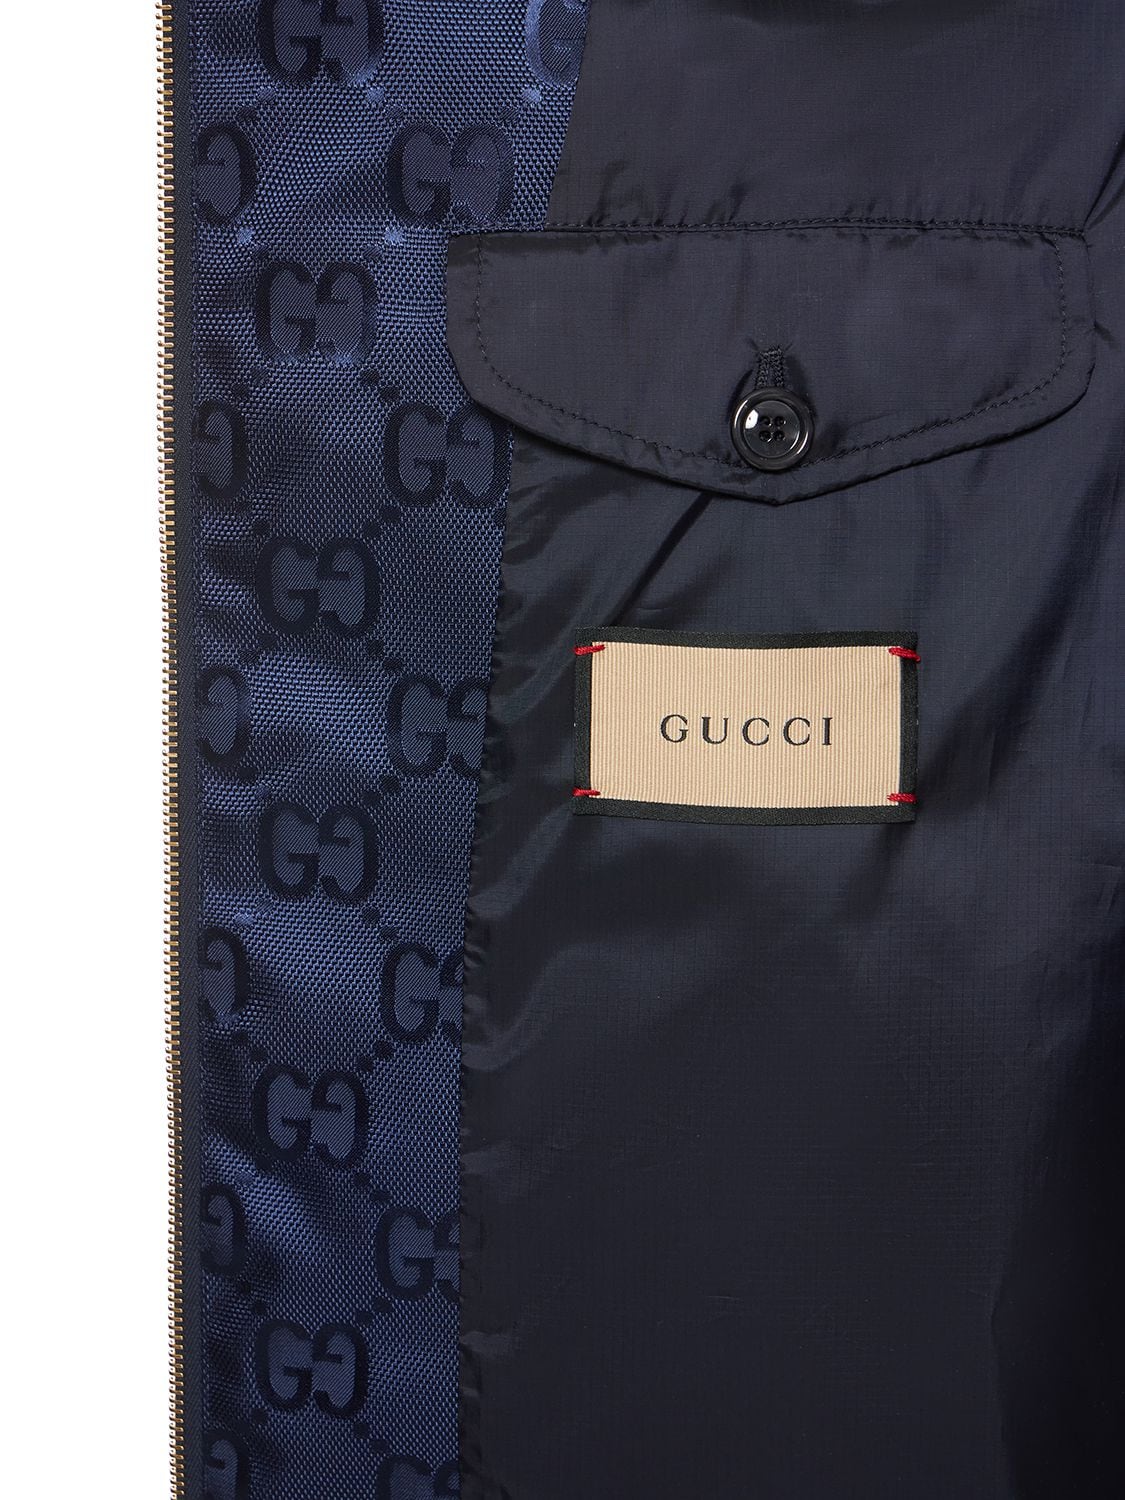 Shop Gucci Tech Bomber Jacket W/ Leather Details In Tide